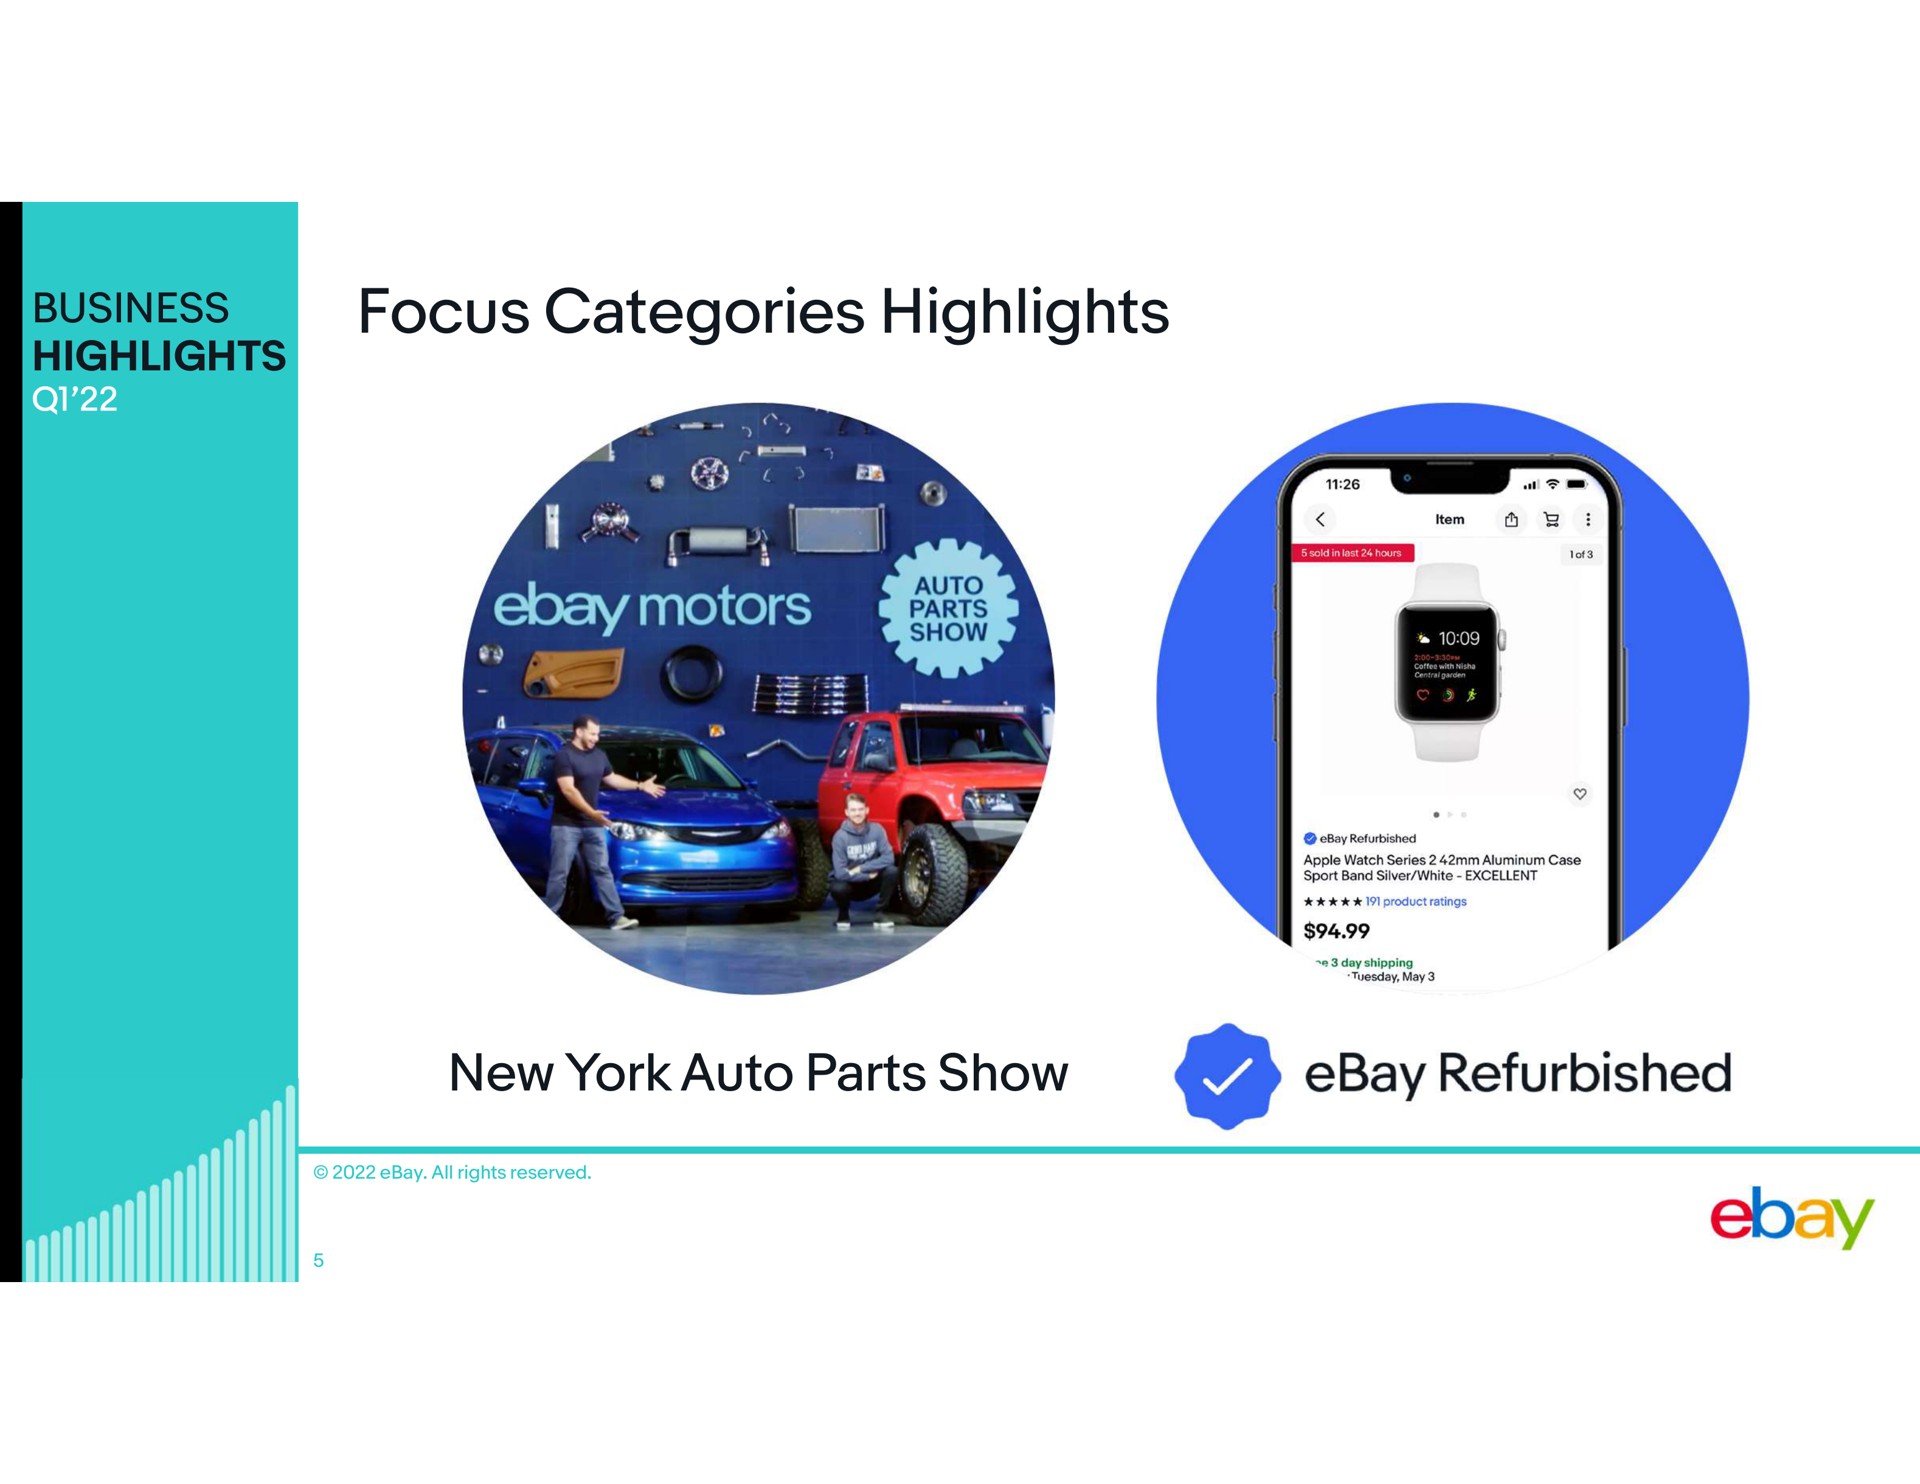 business highlights focus categories highlights new york auto parts show refurbished | eBay